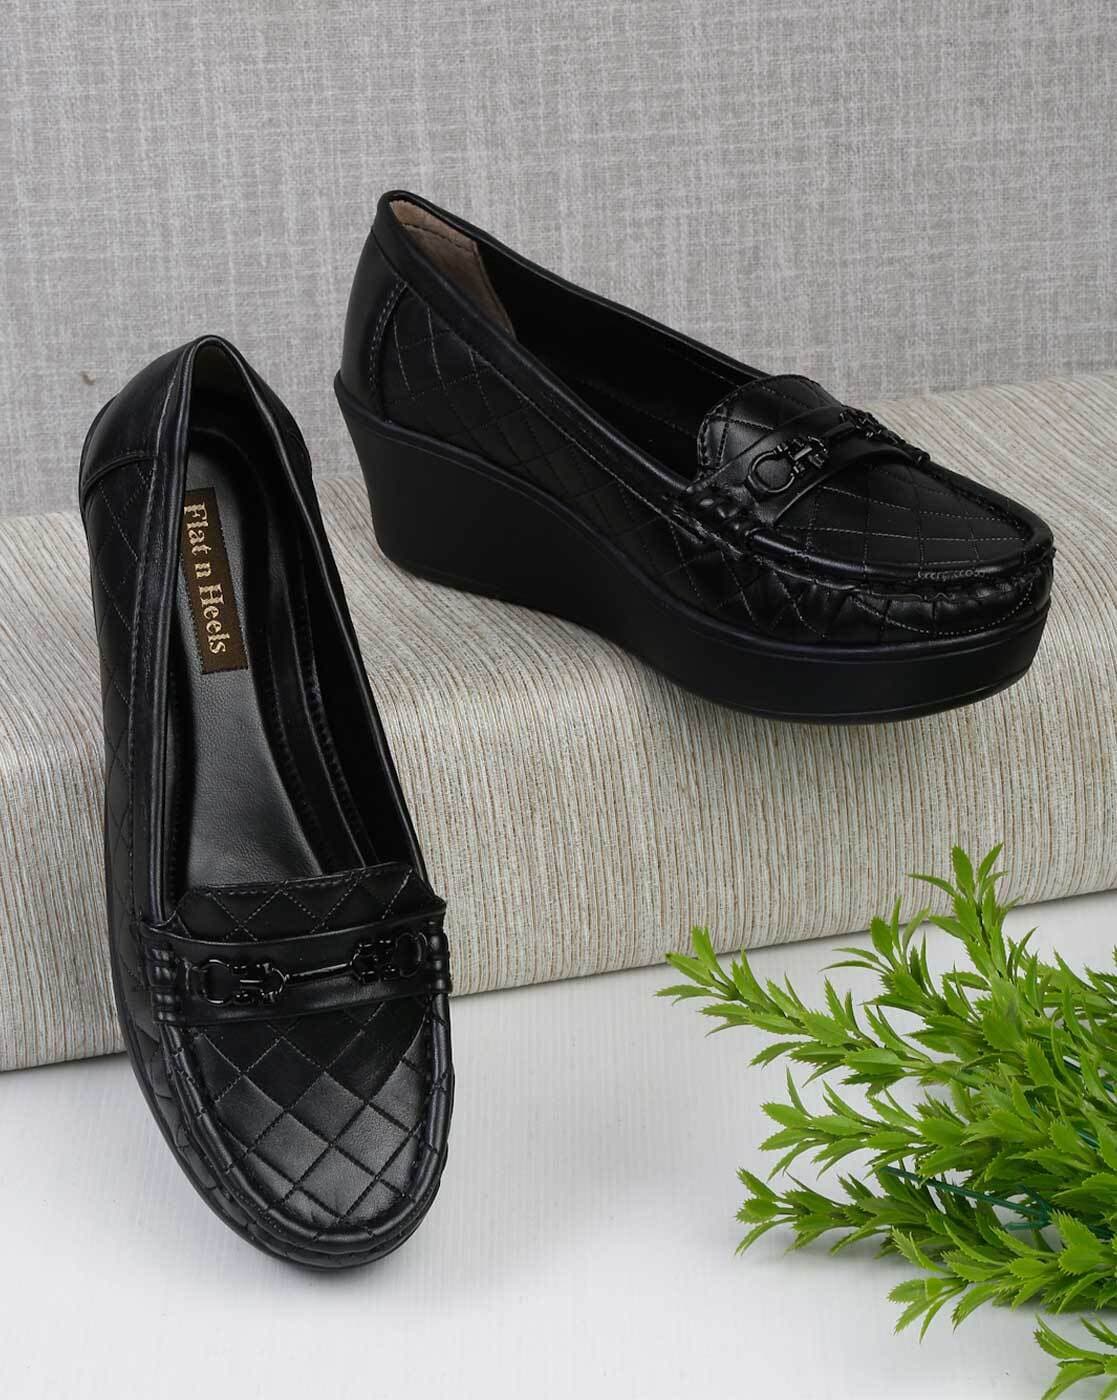 Loafers Women Shoes Spring 2023 New Fashion Designer Chunky Heels Woman  Elegant Square Toe Office Dress Shoes Pumps Zapatos - Pumps - AliExpress